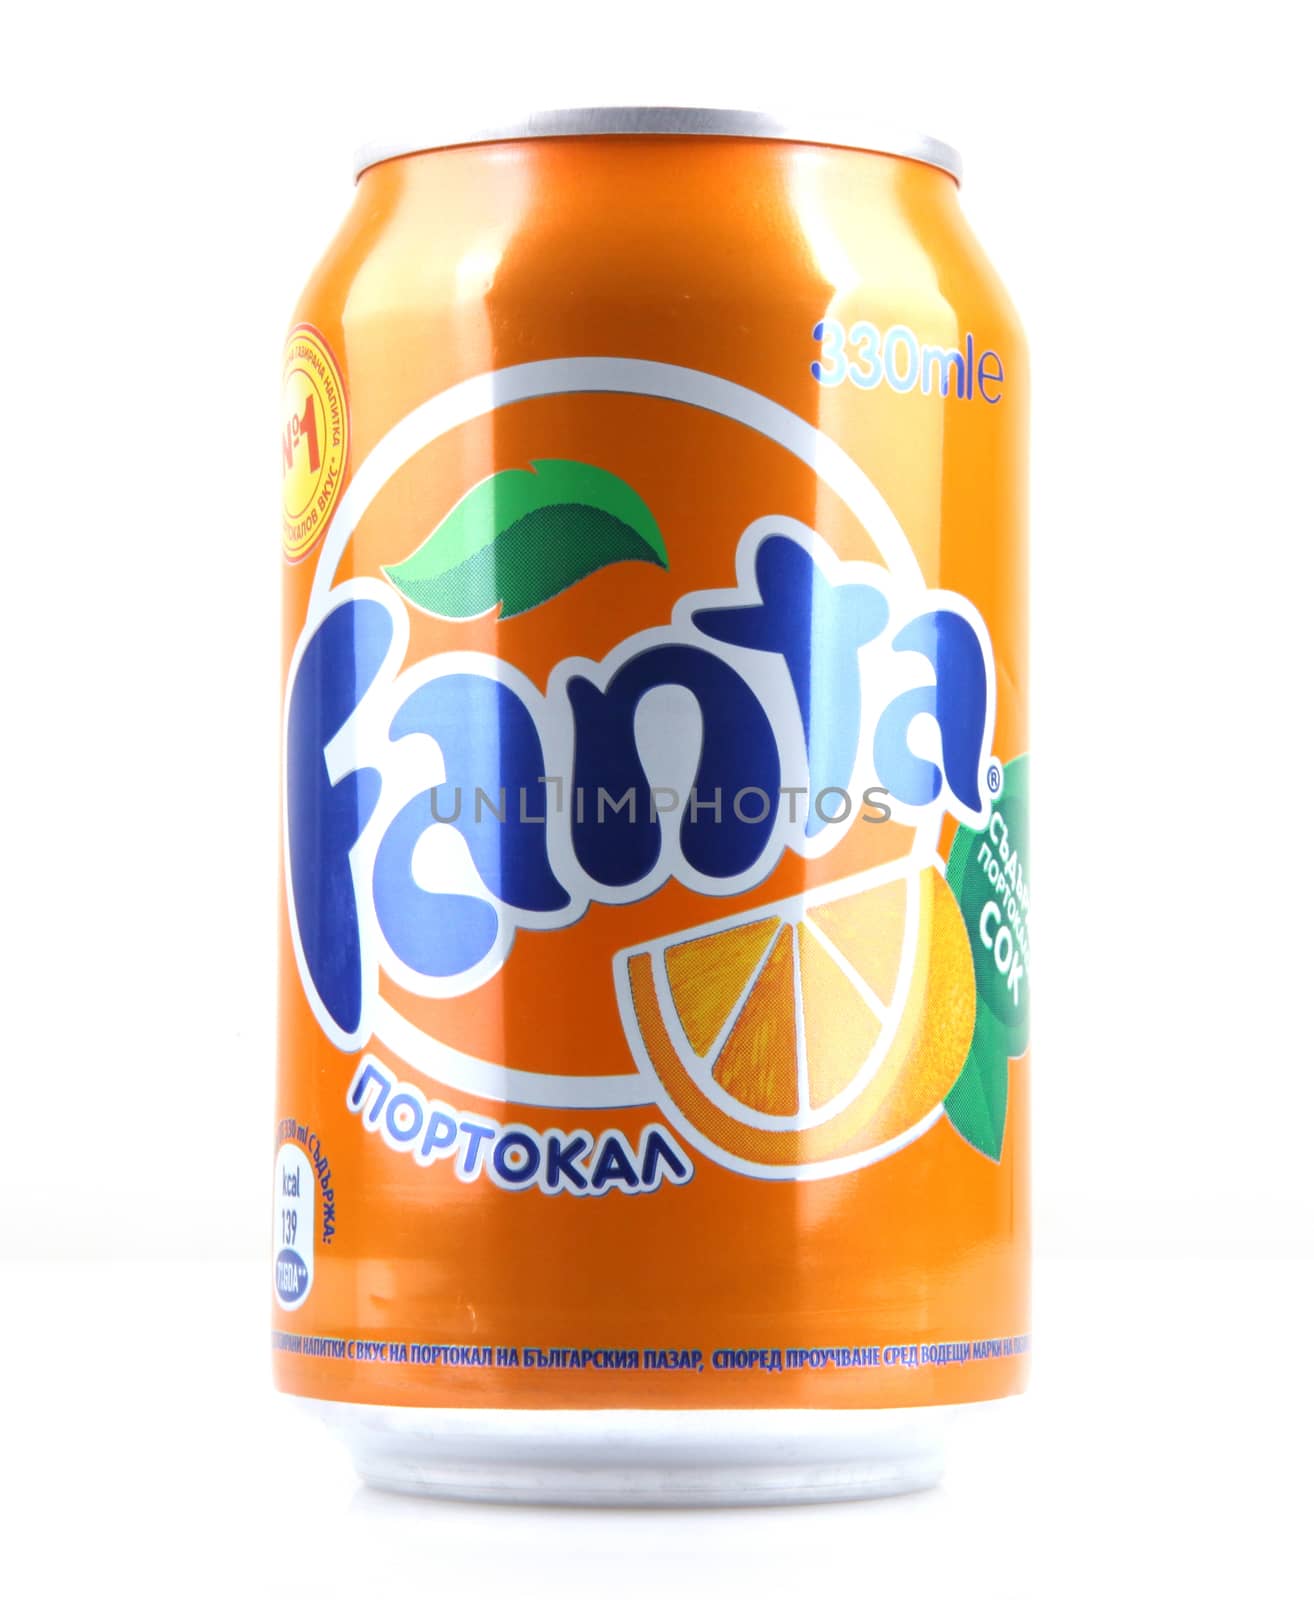 AYTOS, BULGARIA - MARCH 14, 2014: Fanta can isolated on white background. Fanta is a carbonated soft drink sold in stores, restaurants, and vending machines throughout the world.